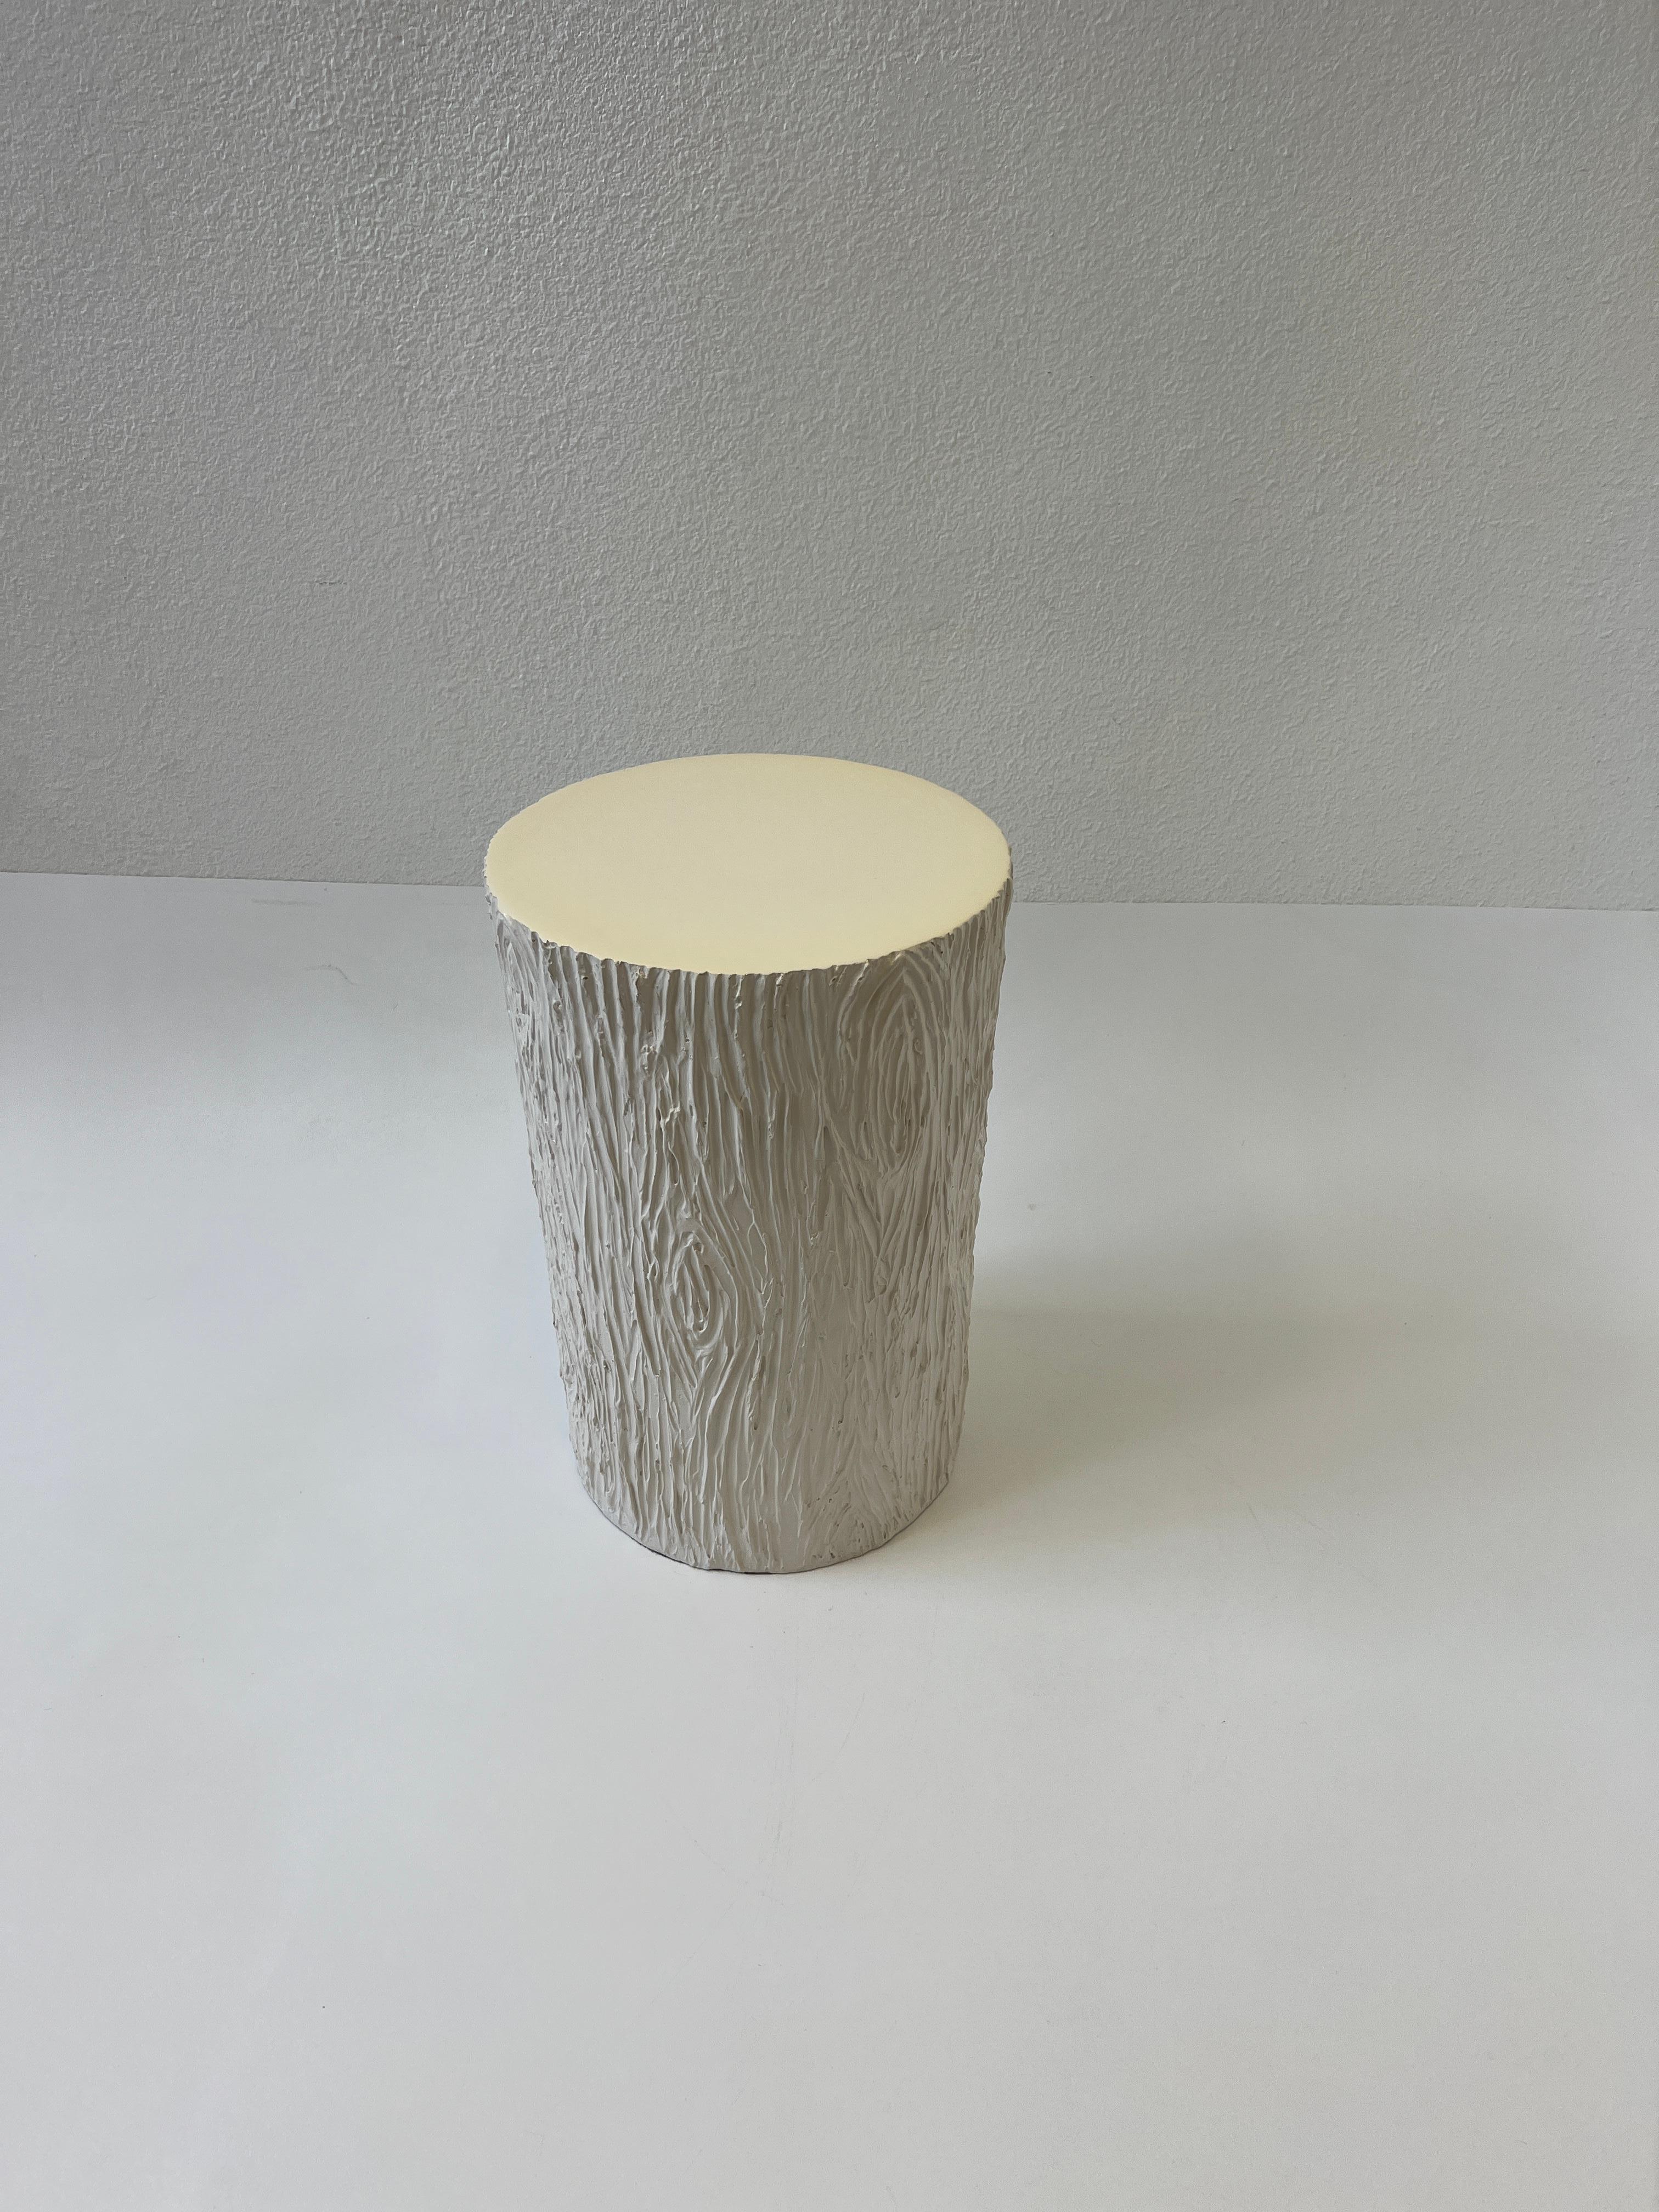 Off White Fiberglass Faux Bois Round Side Table In Good Condition For Sale In Palm Springs, CA